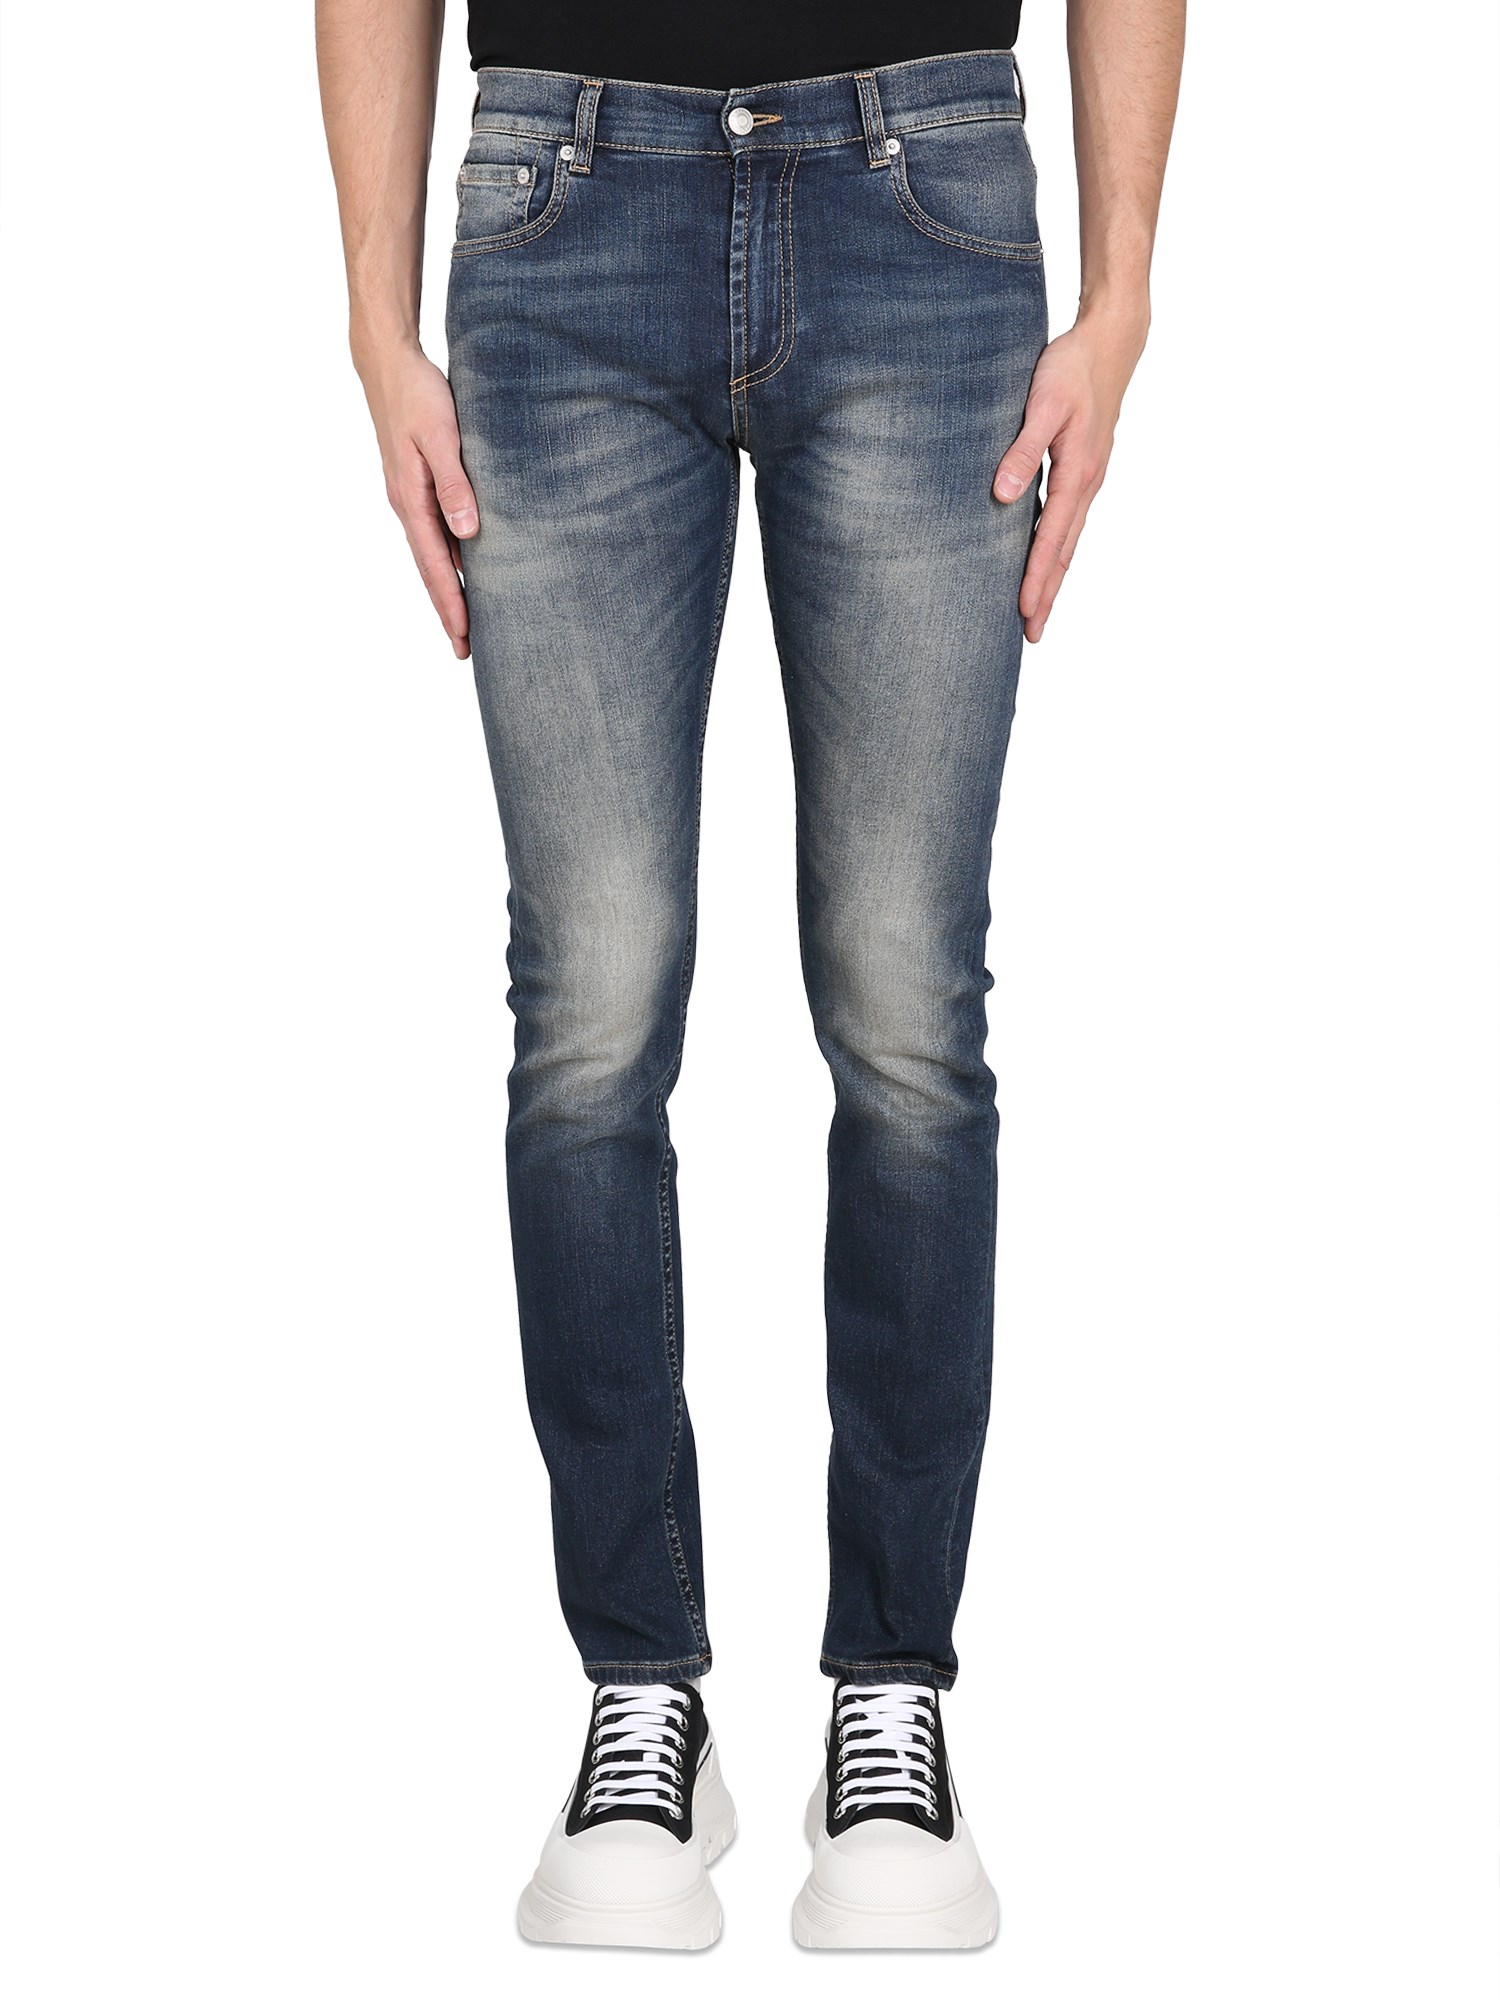 alexander mcqueen jeans with graffiti logo embroidery